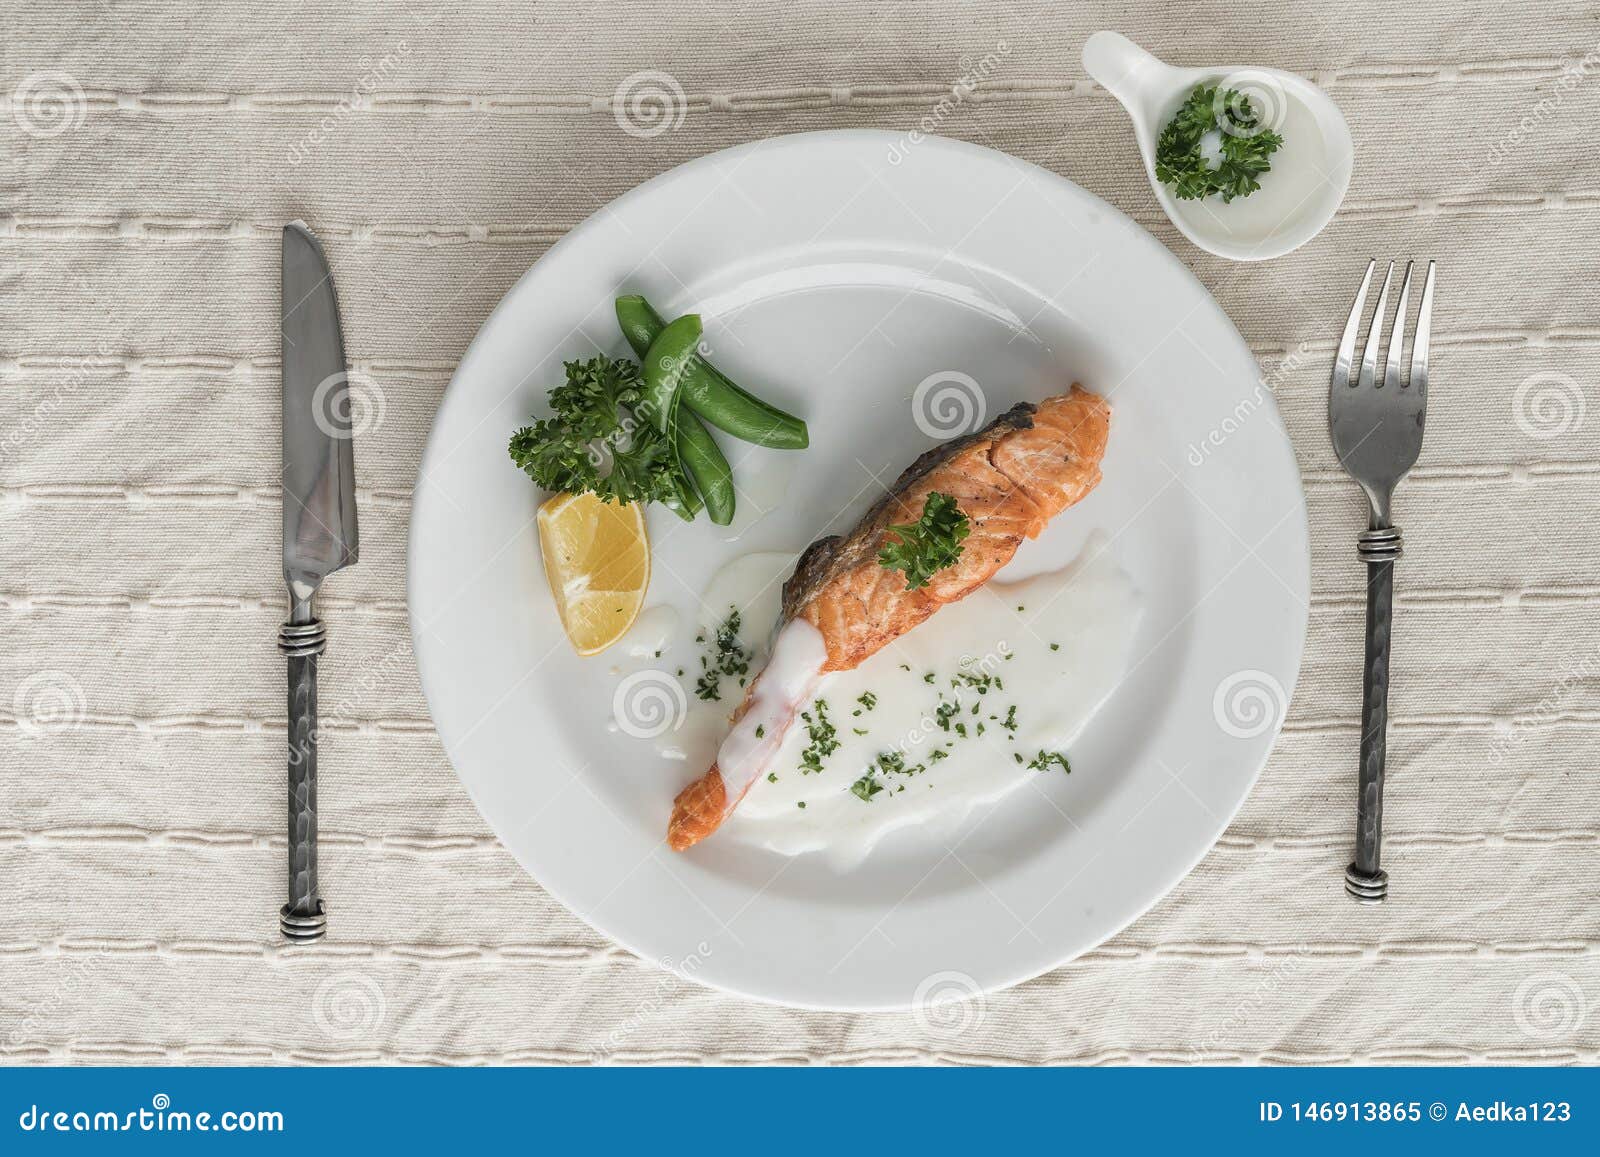 Salmon Fish Fillet Grilled Steak Stock Image - Image of lunch, grill ...